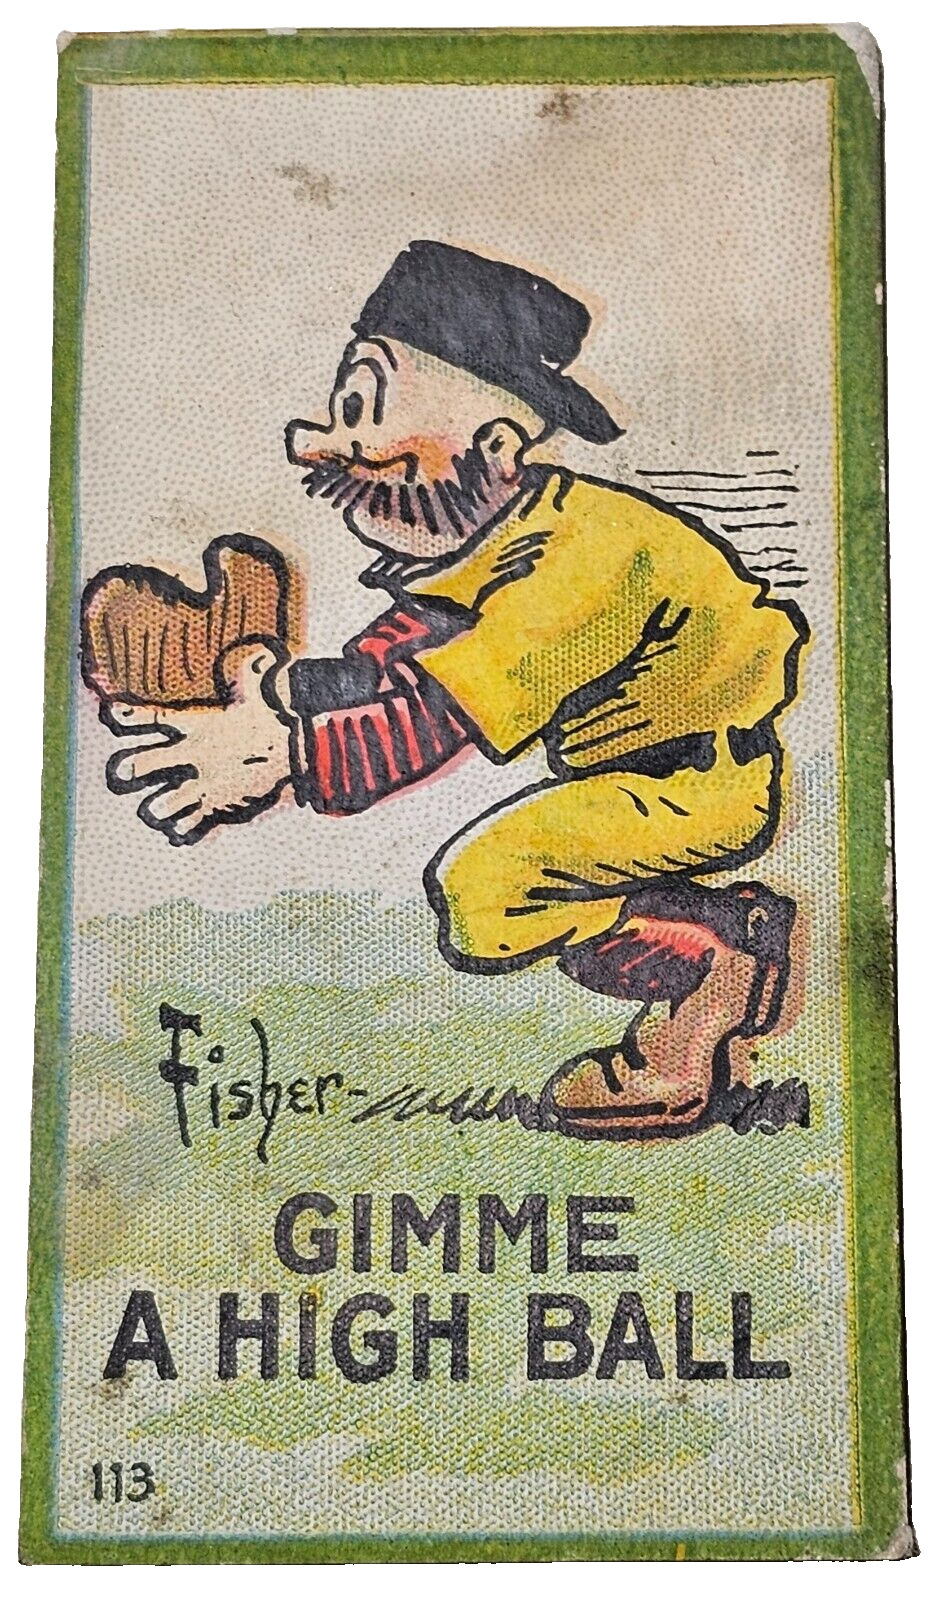 1906-11 T88 Mutt & Jeff #113 Gimme A High Ball, Color-Sweet Caporal Cigarettes